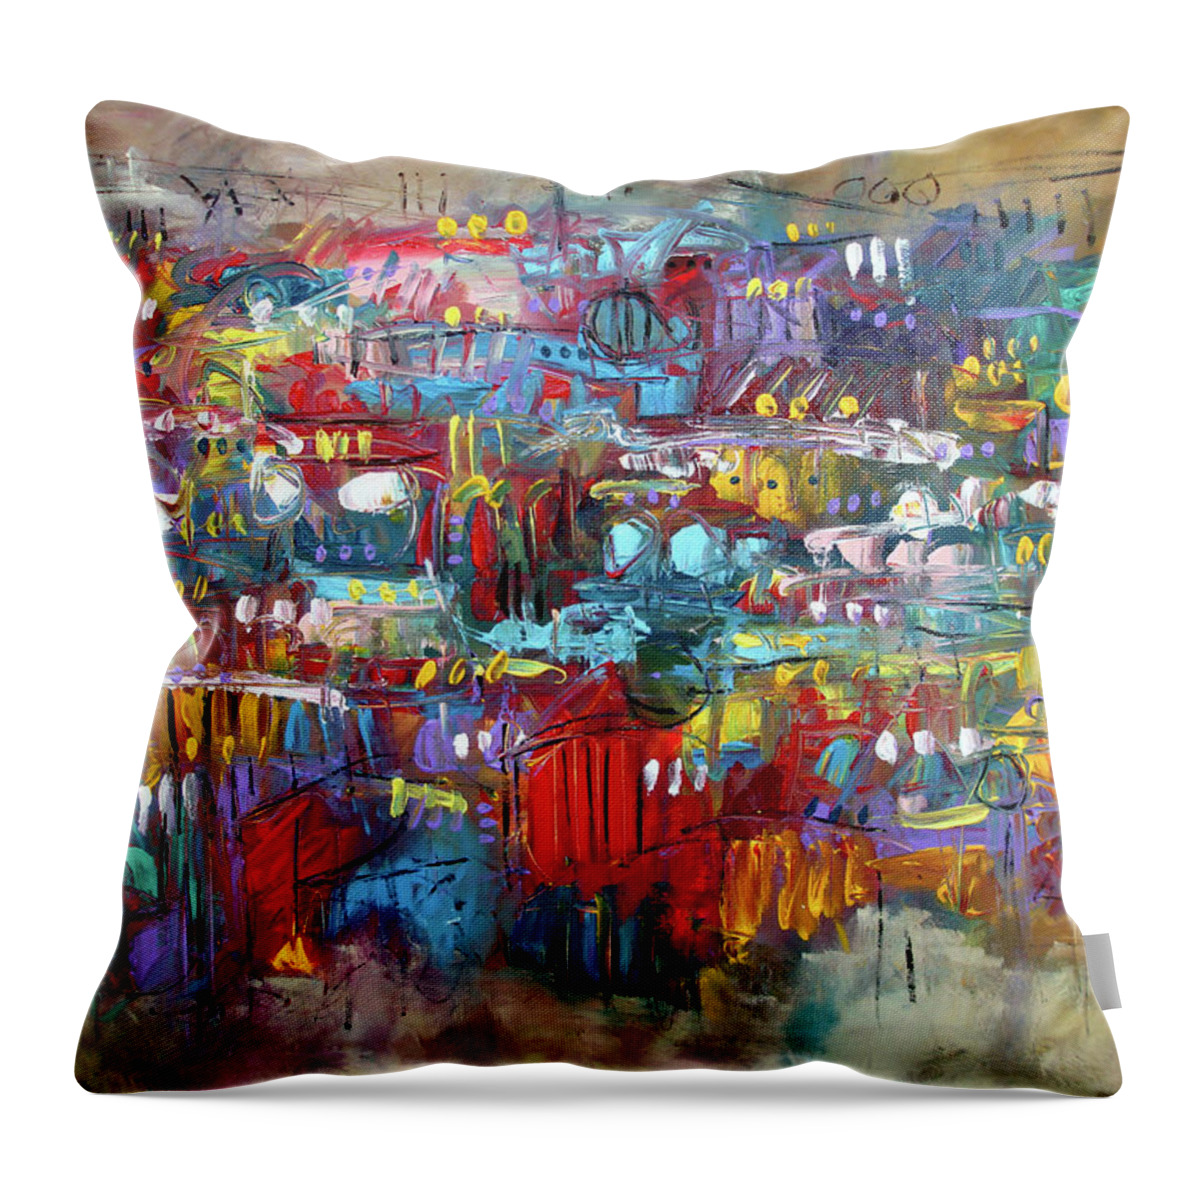 Music Throw Pillow featuring the painting Composing For Joy by Jim Stallings